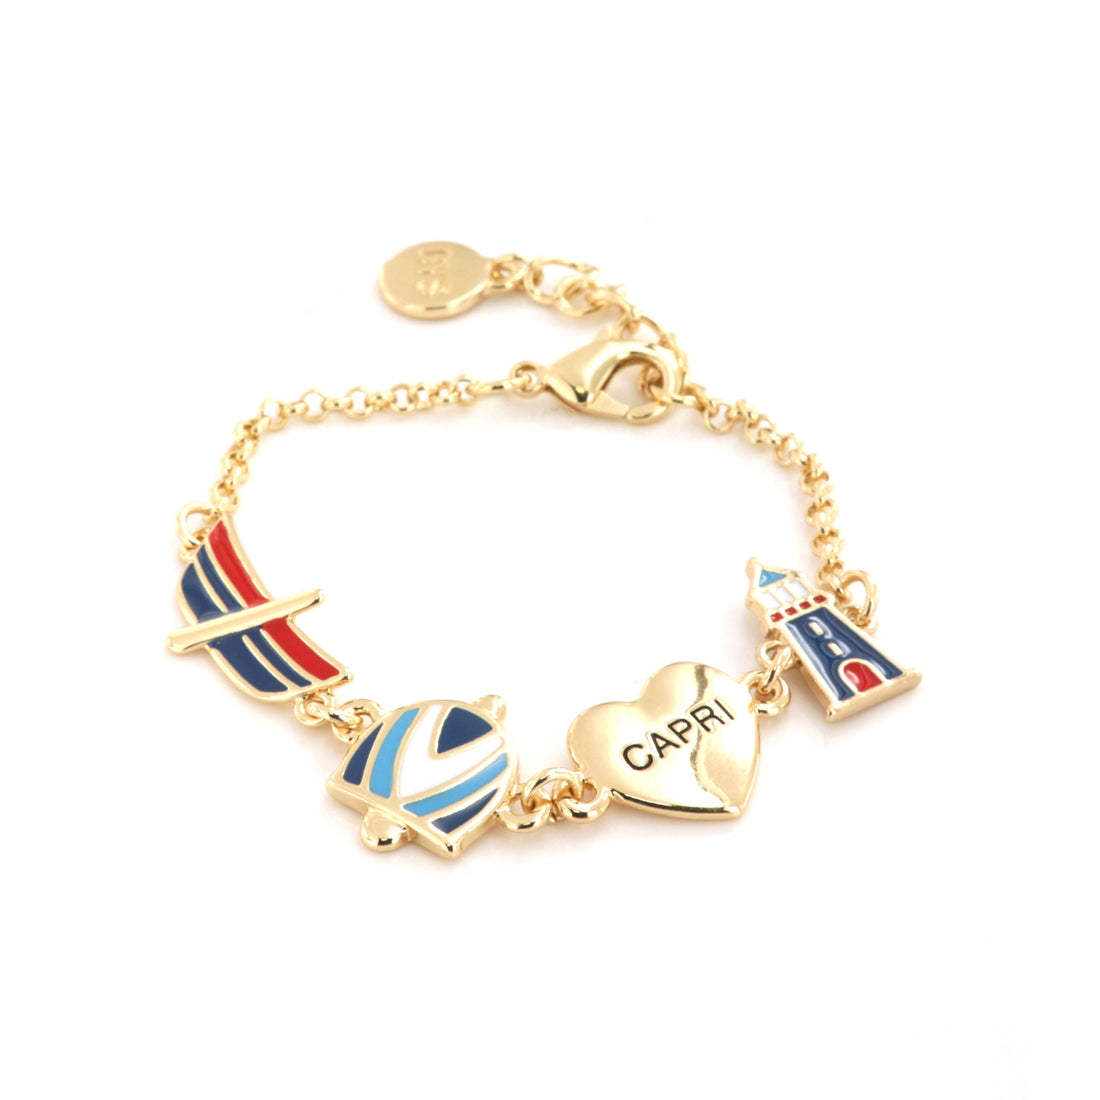 Metal bracelet with symbols inspired by the island of Capri, embellished with colored glazes